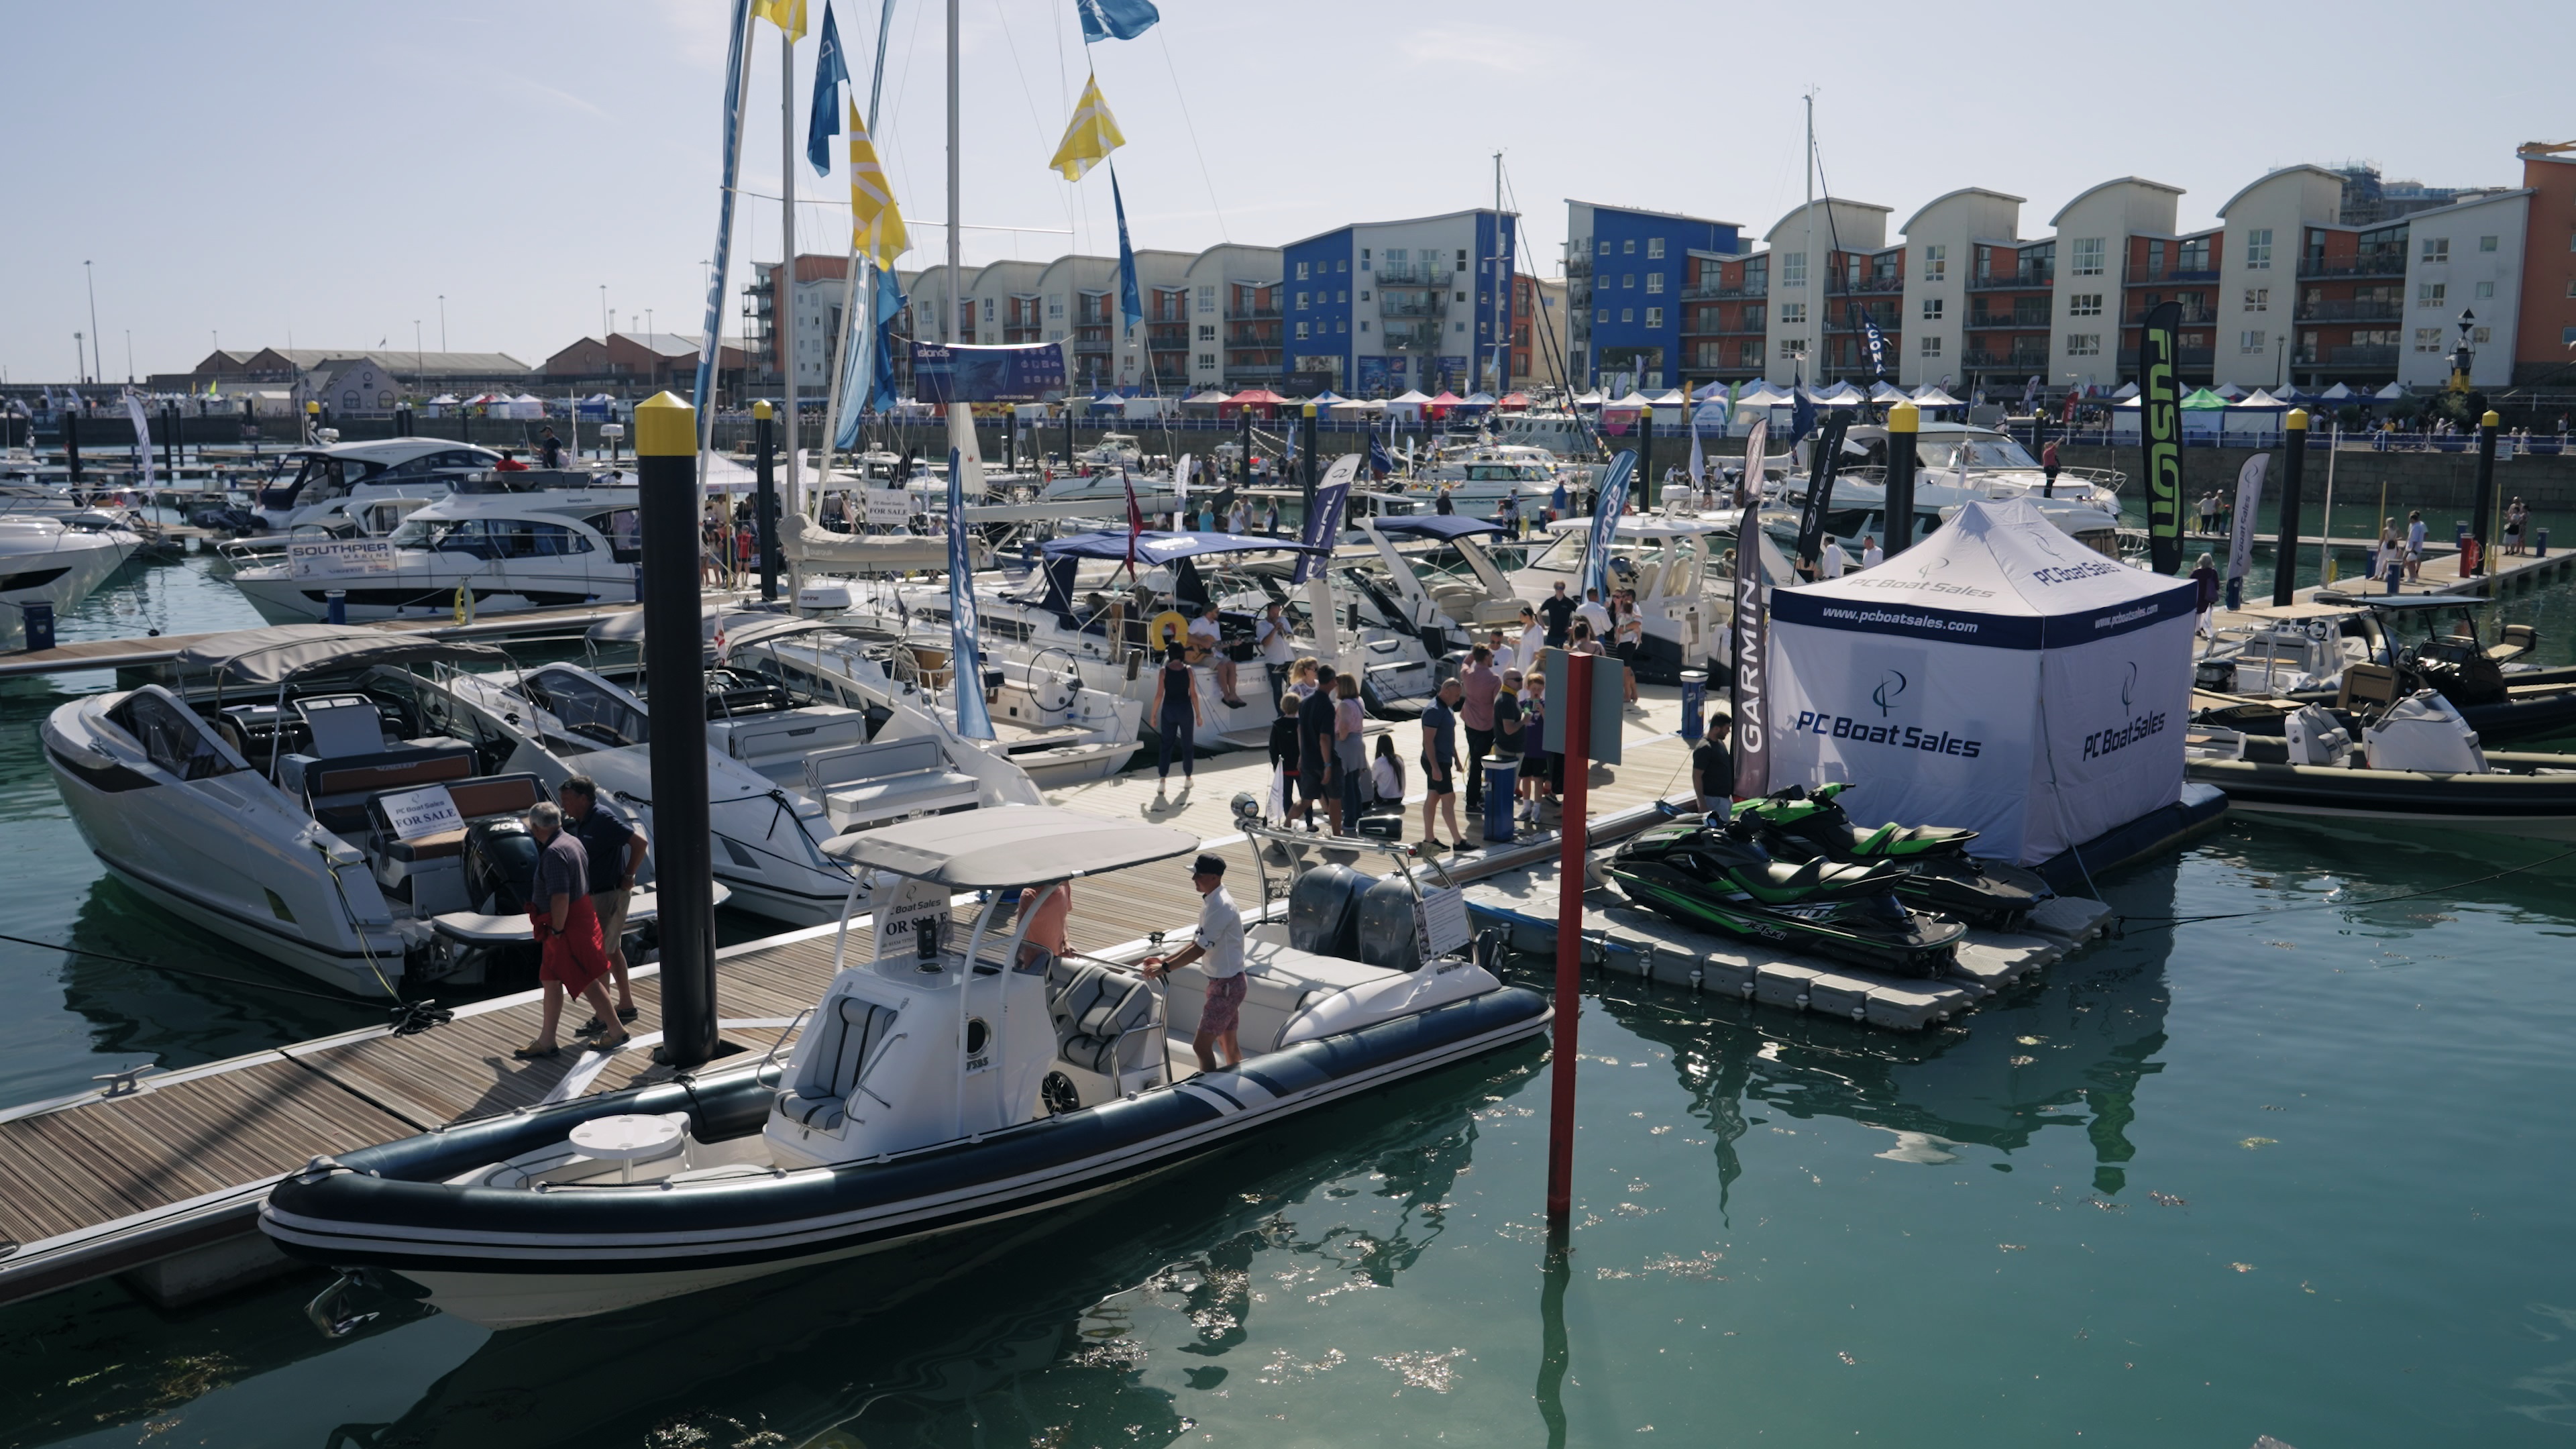 PC_Boat_Sales_-_Jersey_Boat_Show_2_test (1)